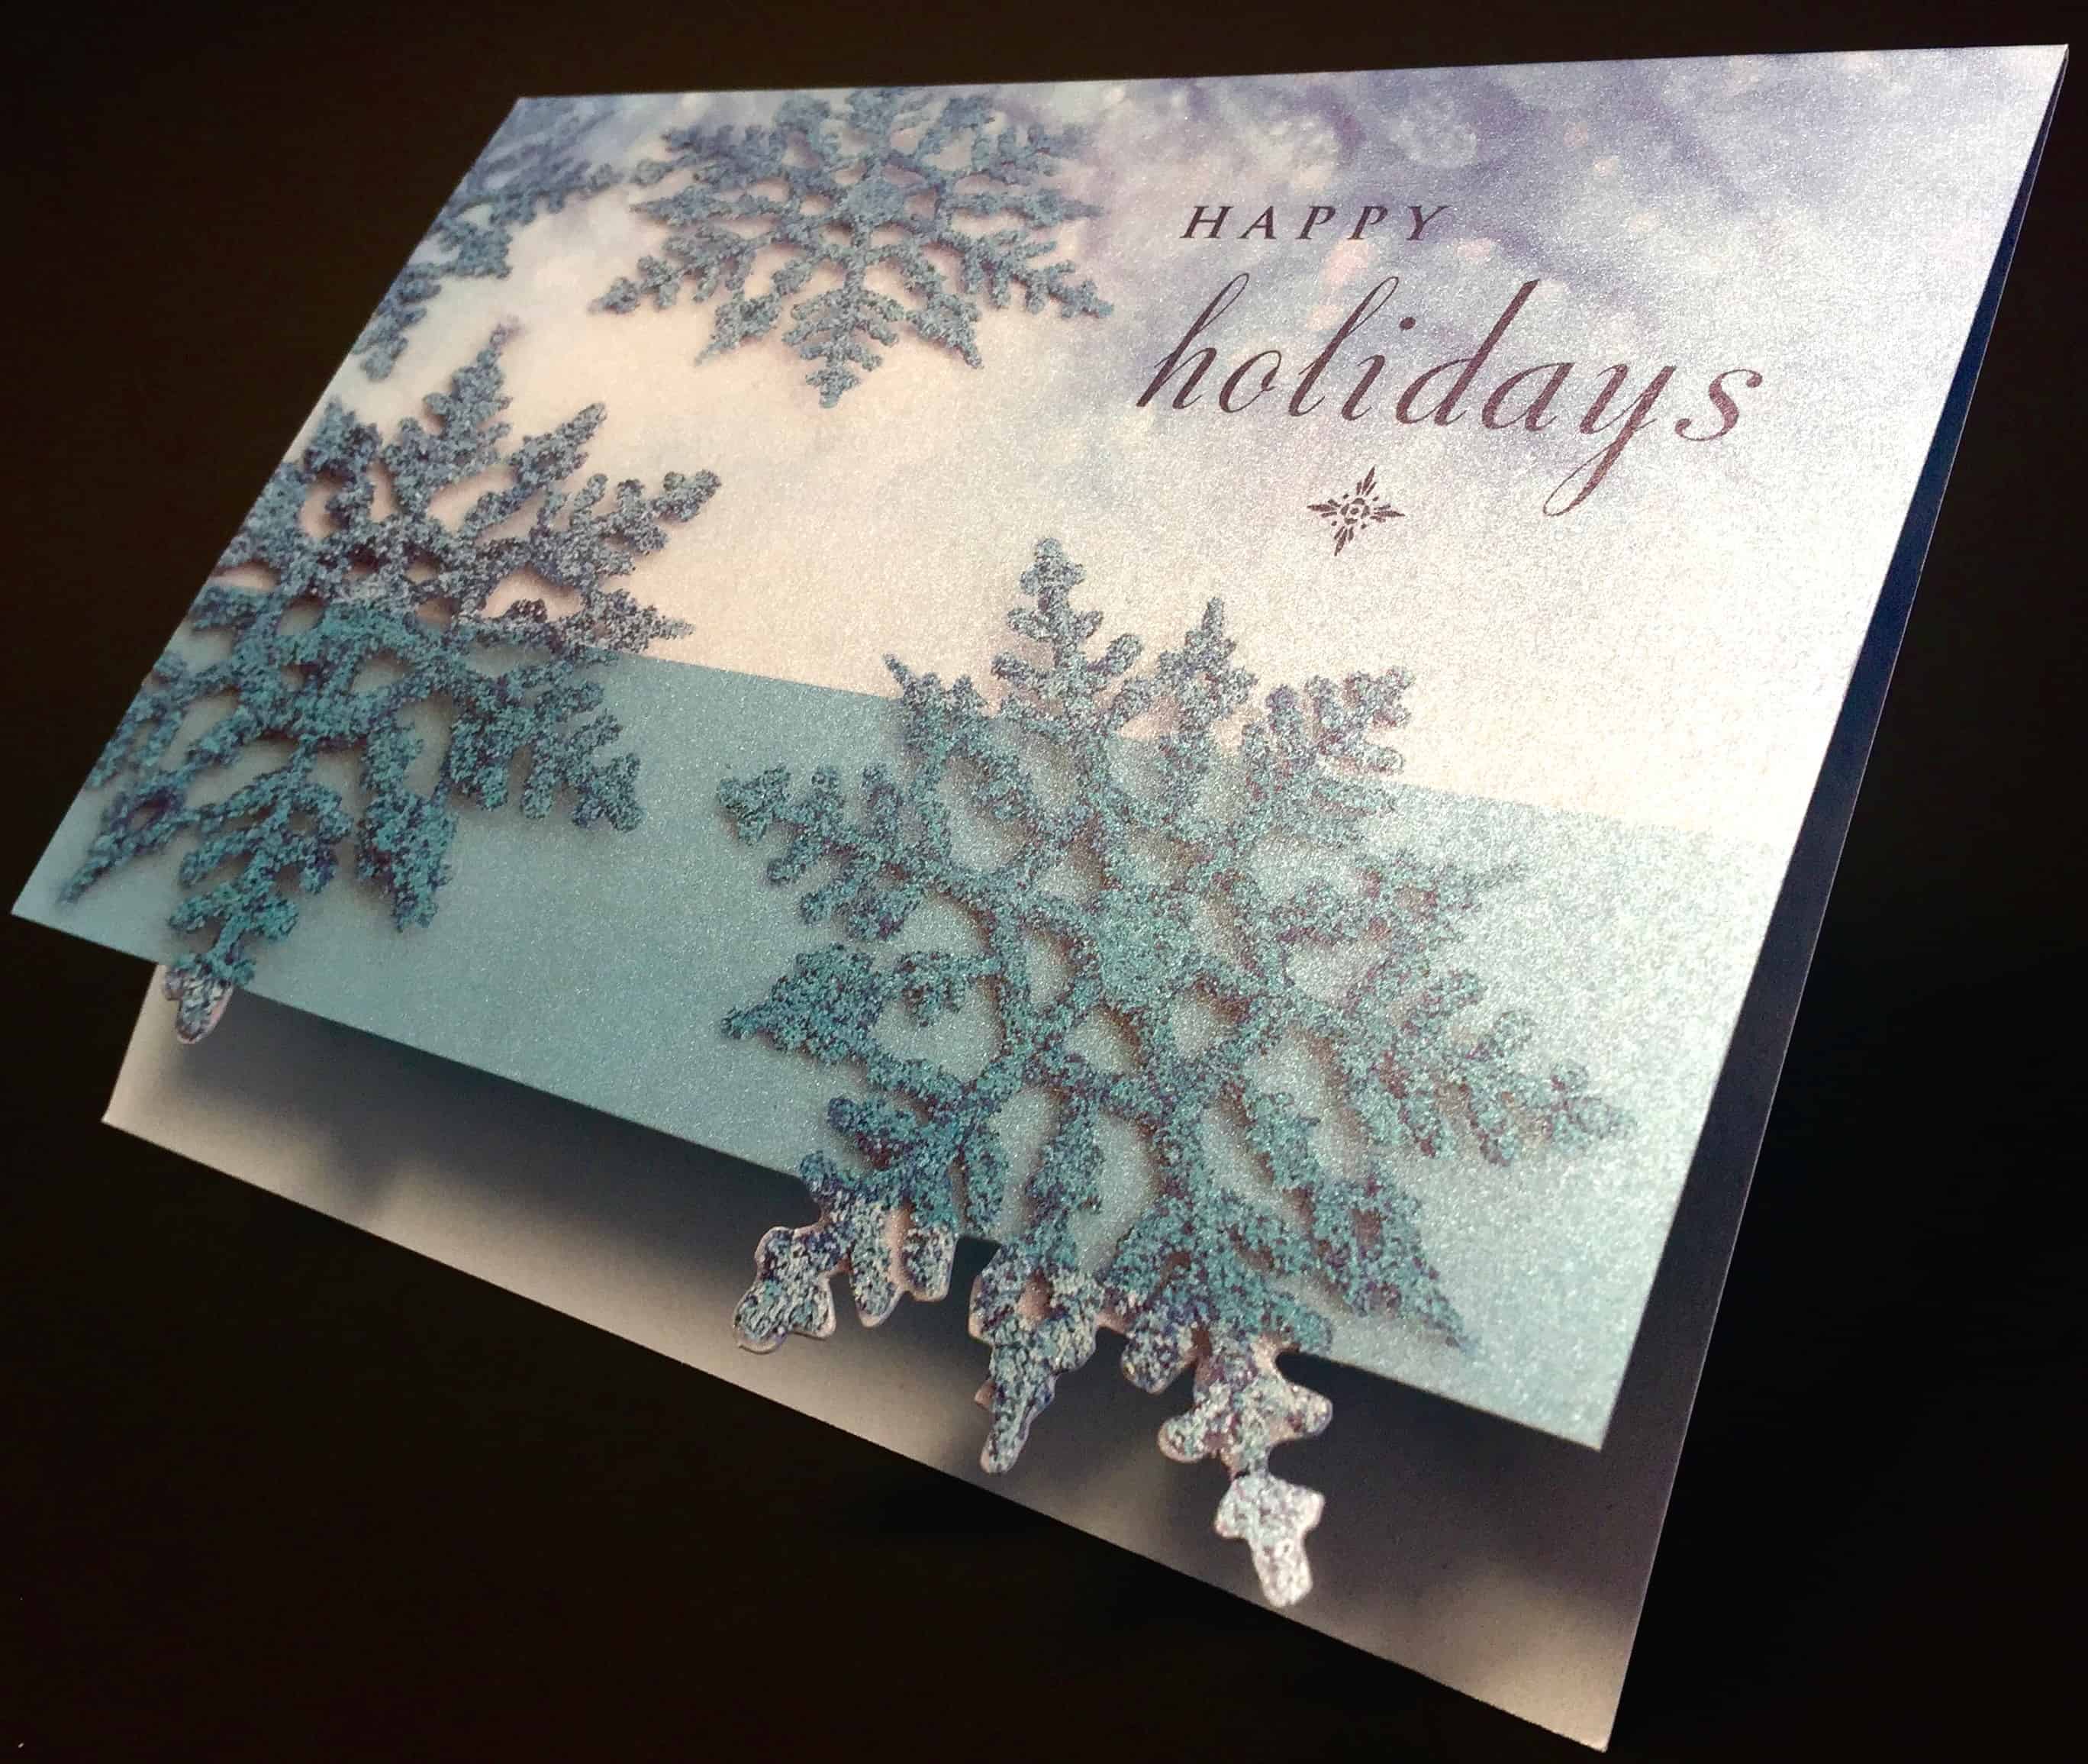 8 important reasons to send business holiday cards - Corcoran Printing